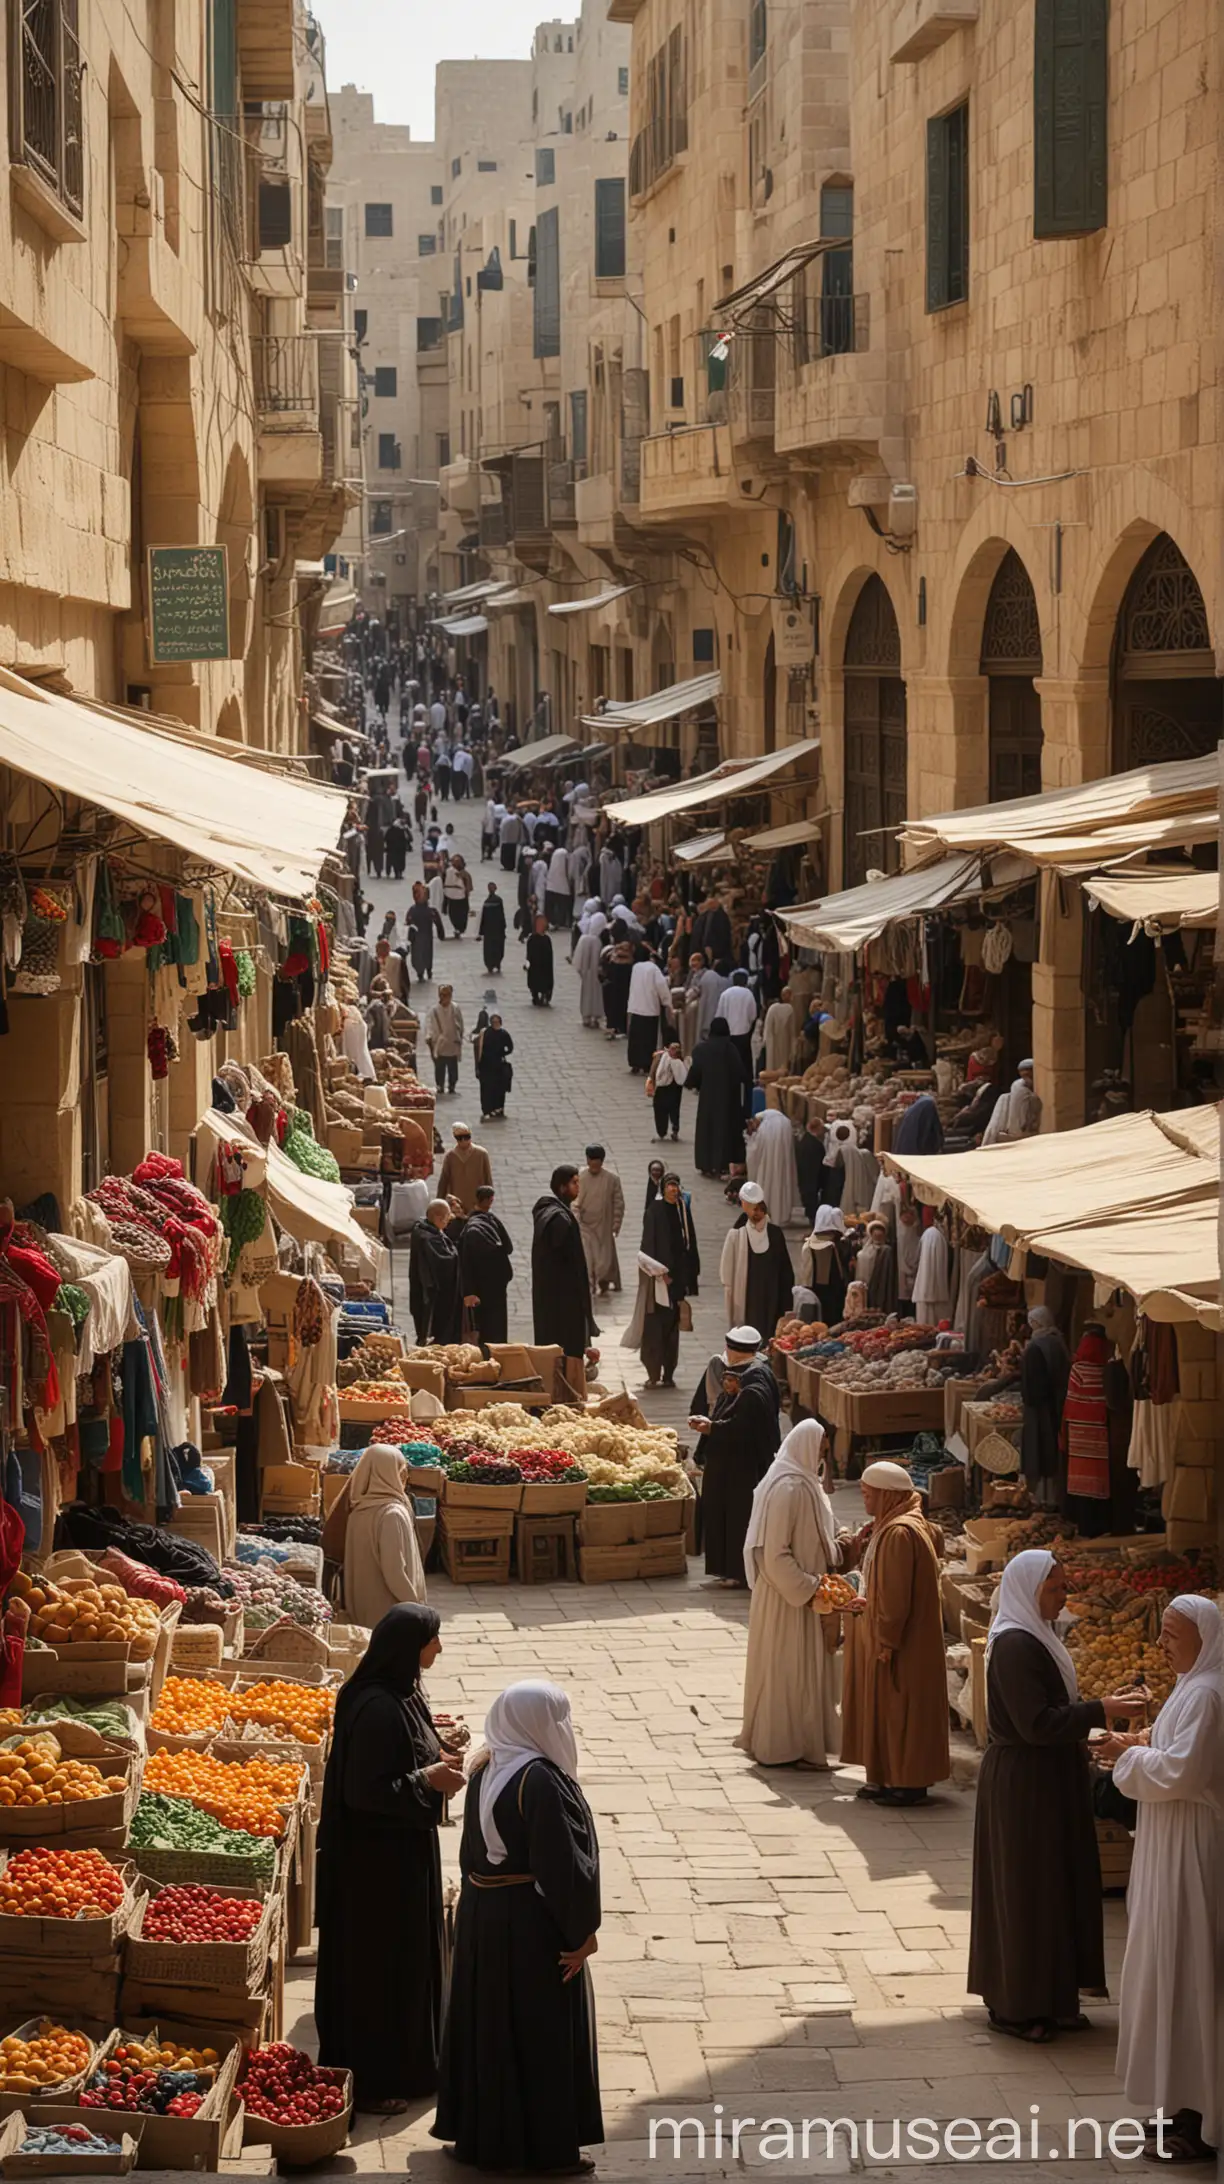 Multicultural Harmony in Historic Palestinian Marketplace